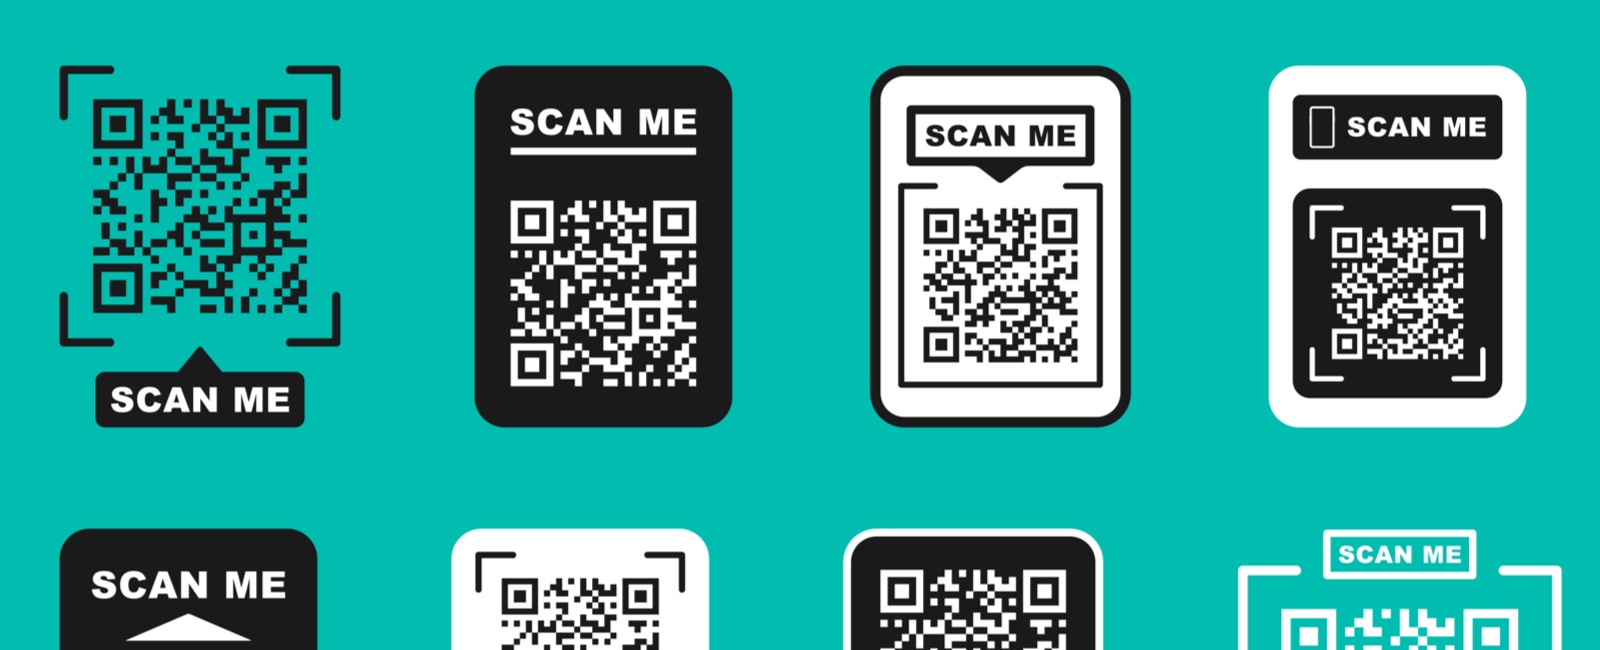 Improving Accessibility with QR Codes